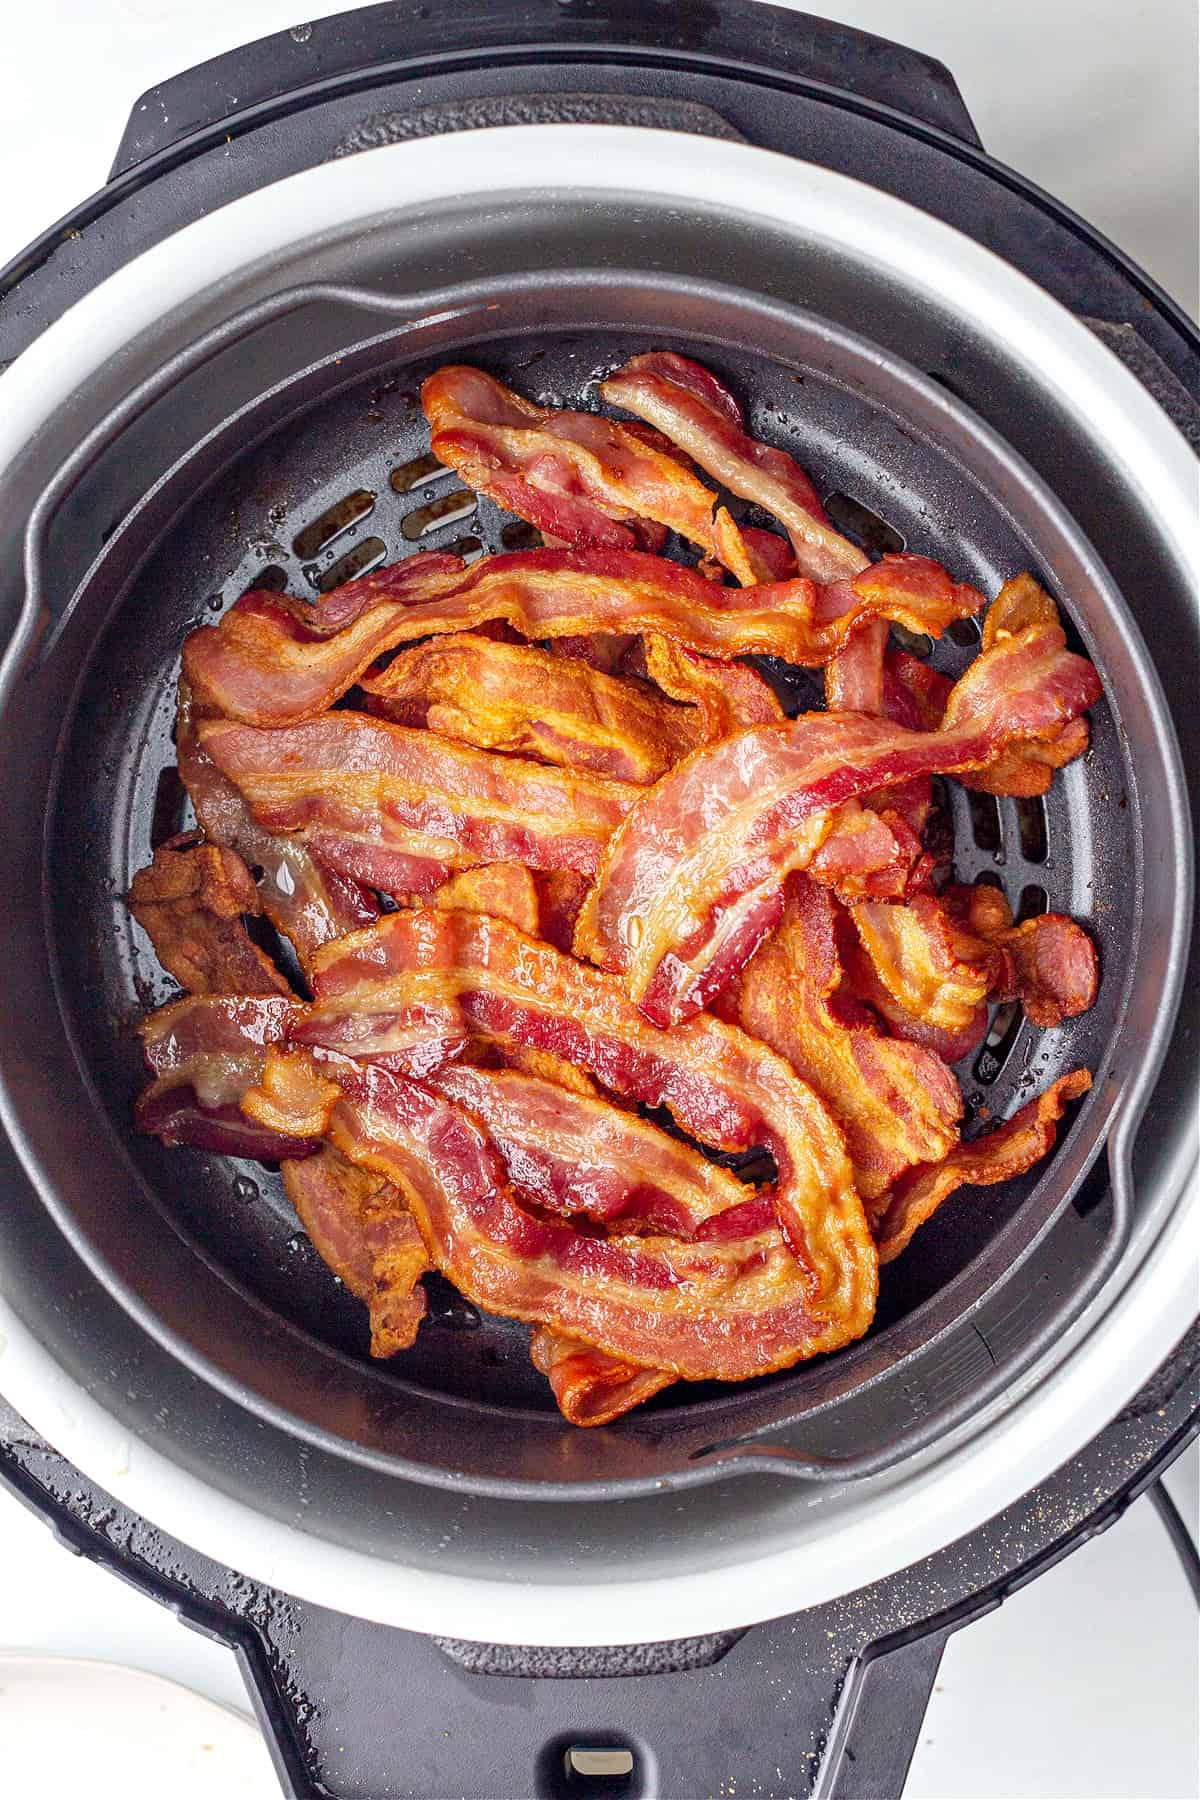 Overhead view of a pile of cooked bacon in an air fryer